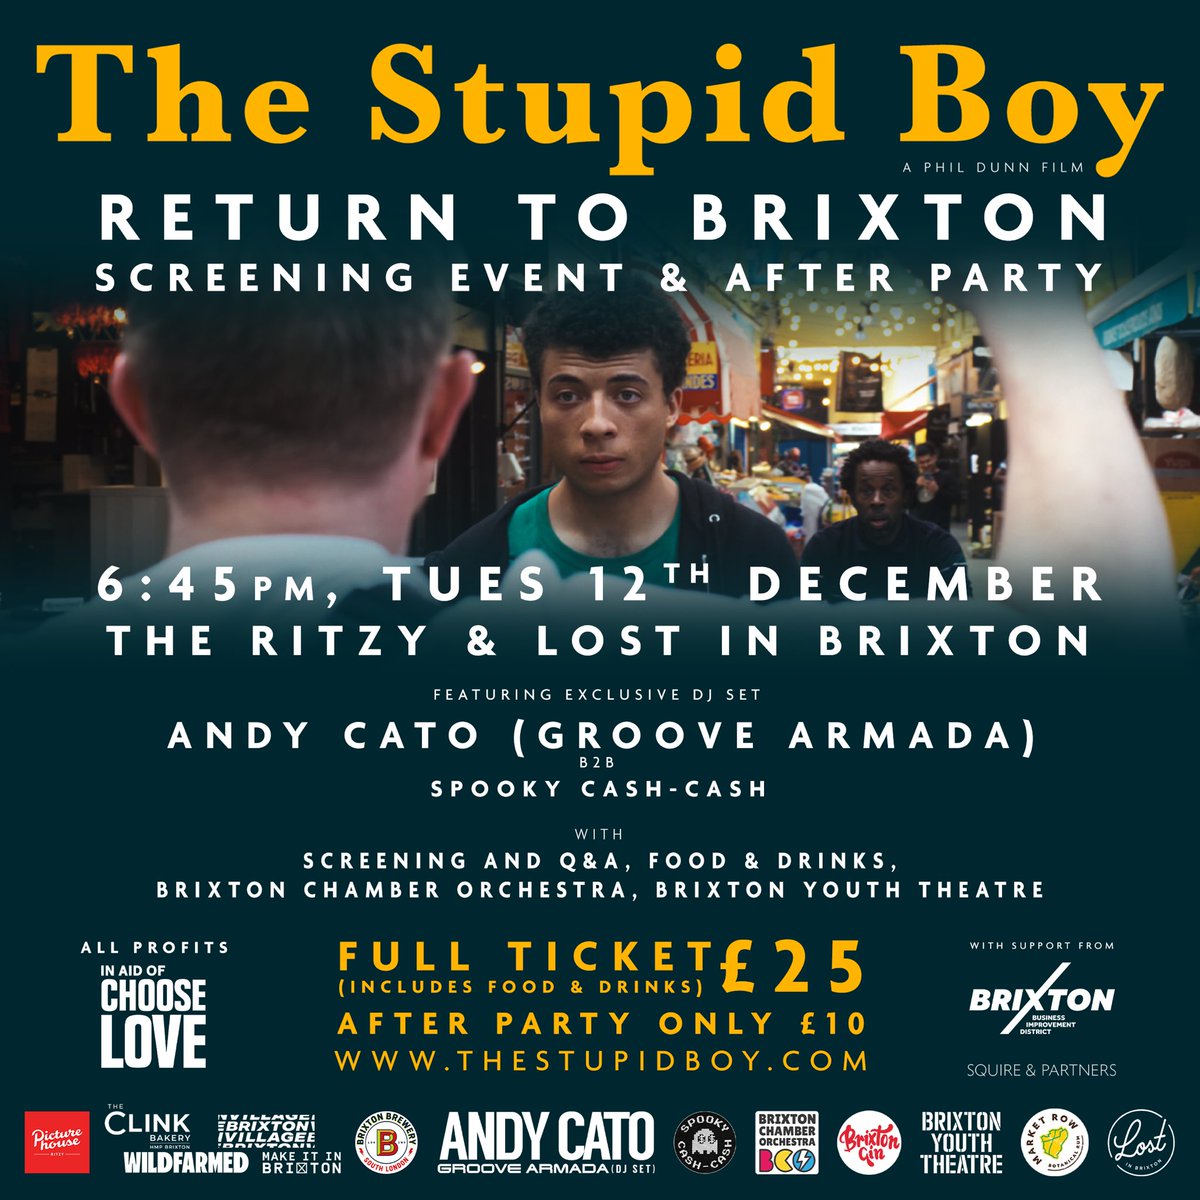 We’re thrilled to support The Stupid Boy film premier in Brixton on Tuesday! You don’t want to miss this one 💯